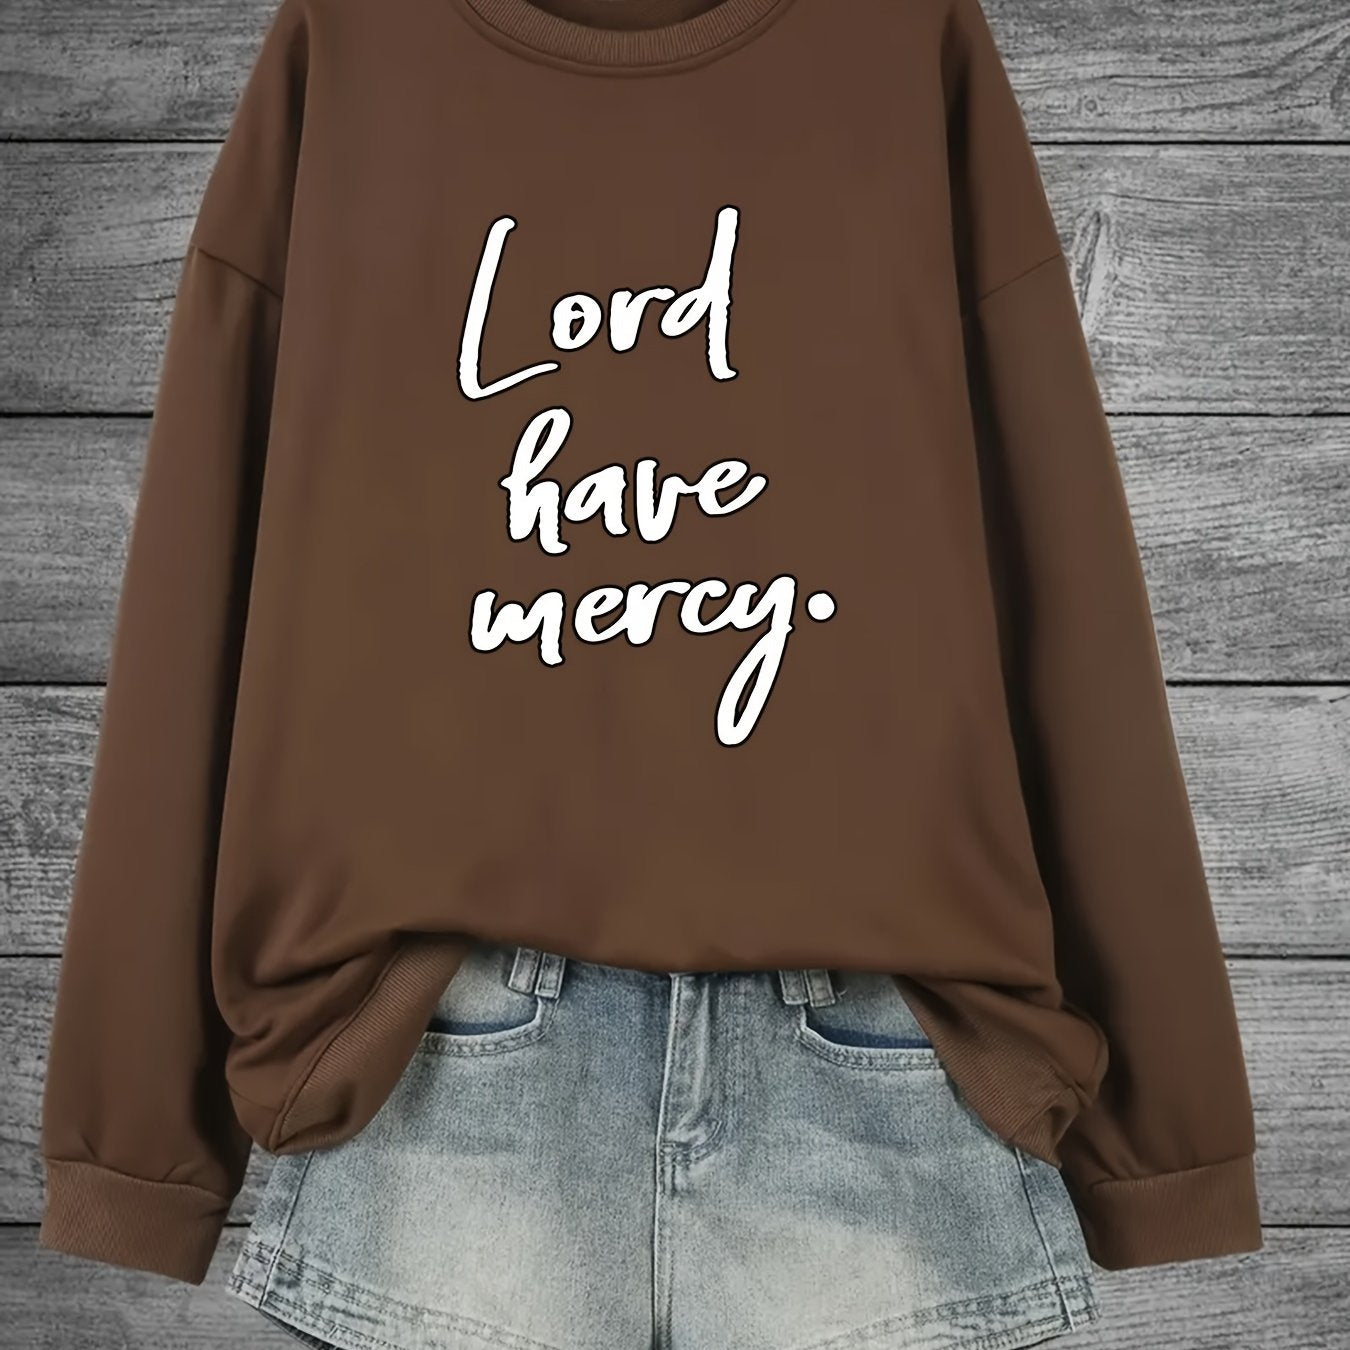 Lord Have Mercy Plus Size Women's Christian Pullover Sweatshirt claimedbygoddesigns